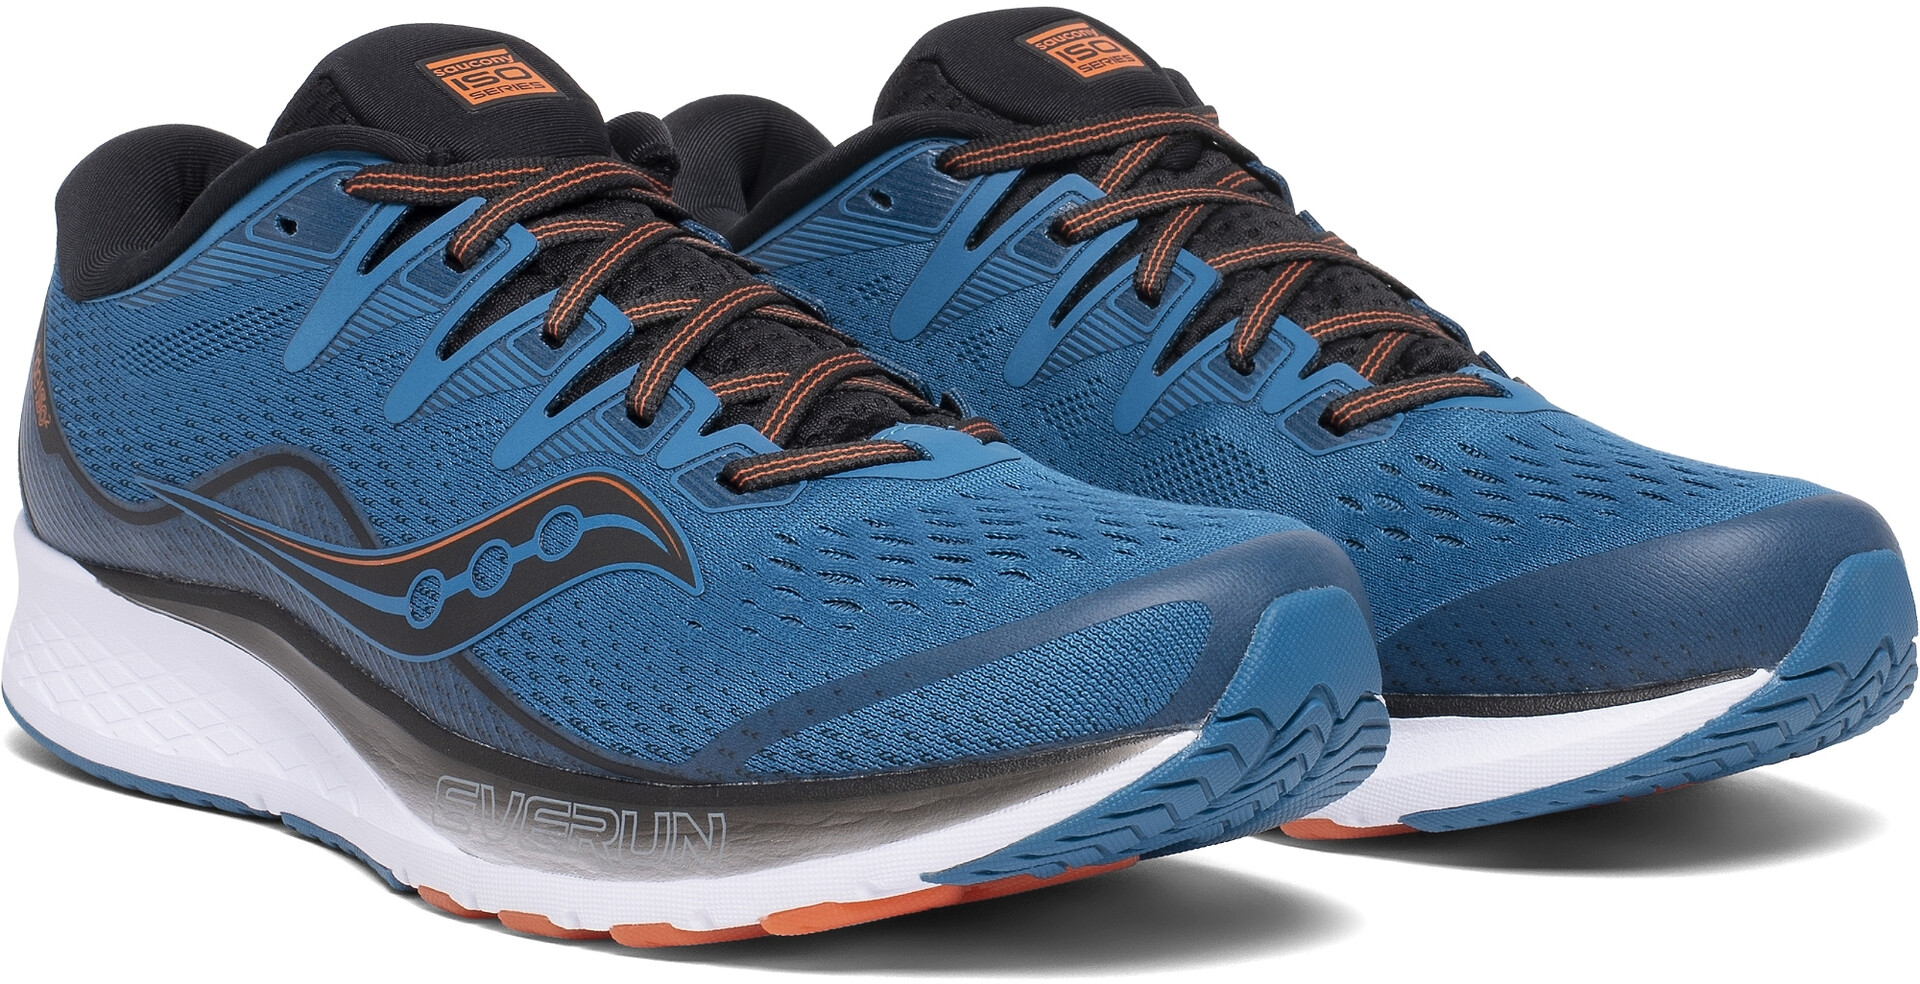 saucony chaussures homme cyan